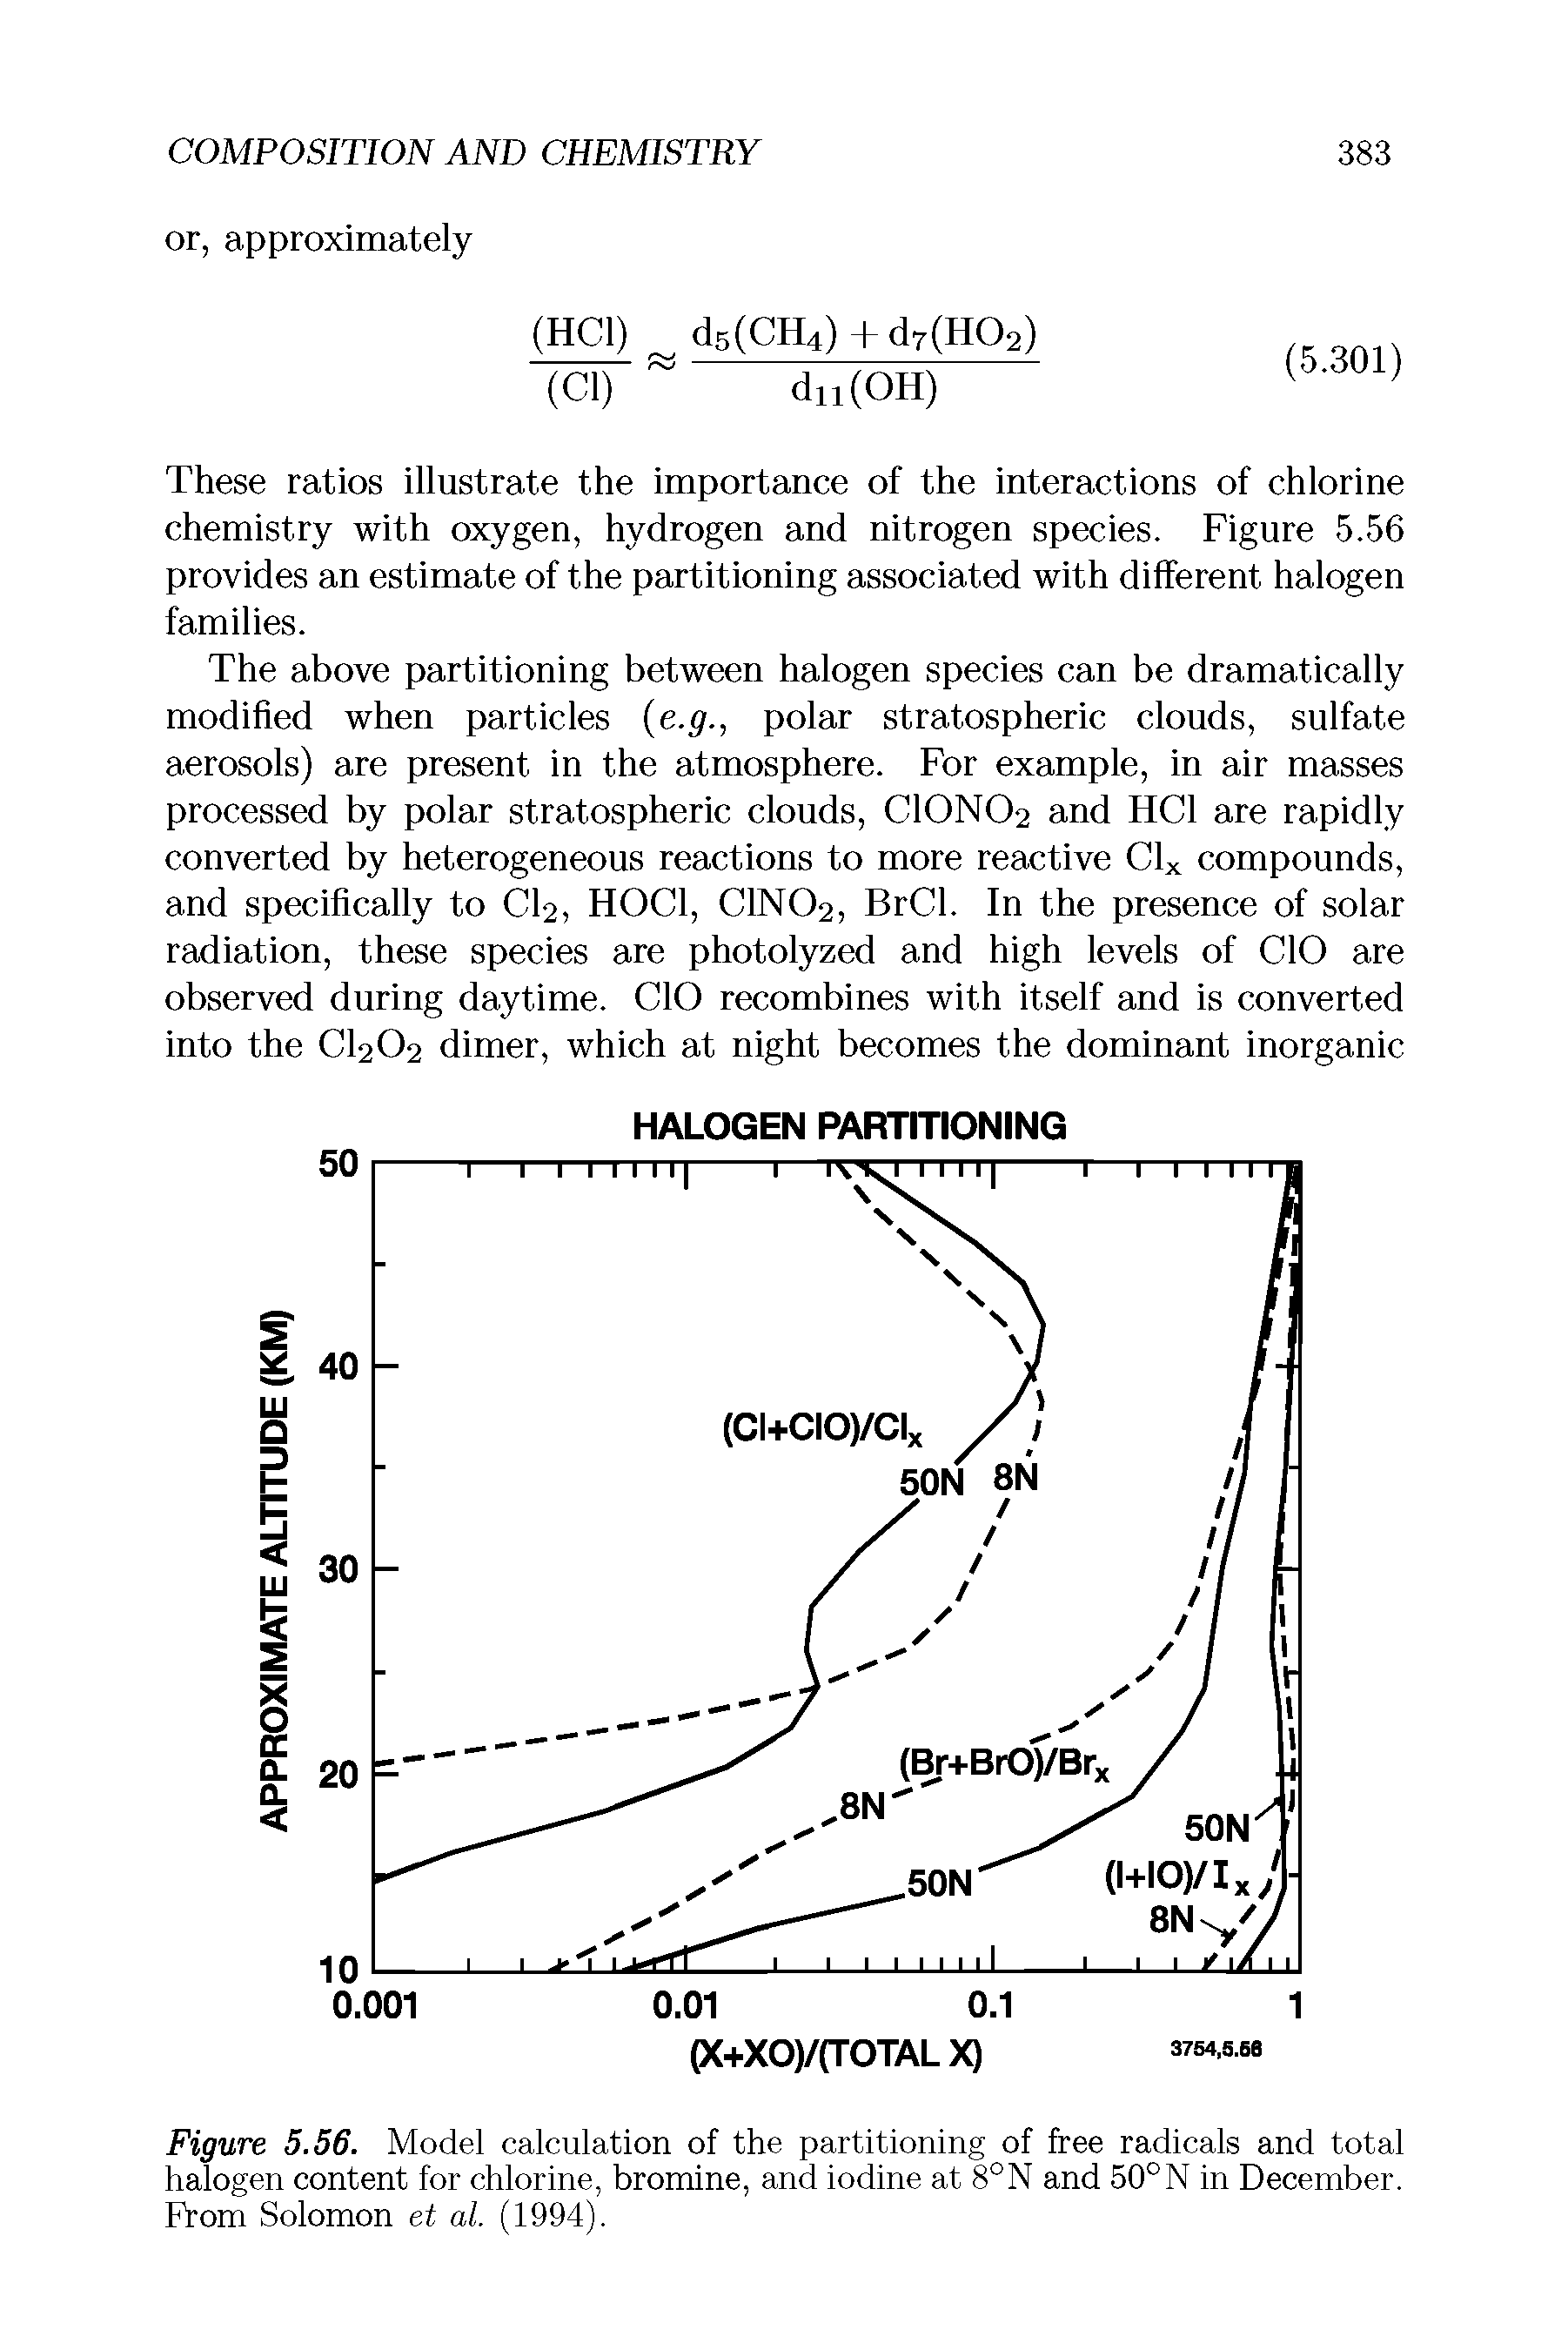 Figure 5.56. Model calculation of the partitioning of free radicals and total halogen content for chlorine, bromine, and iodine at 8°N and 50°N in December. From Solomon et al. (1994).